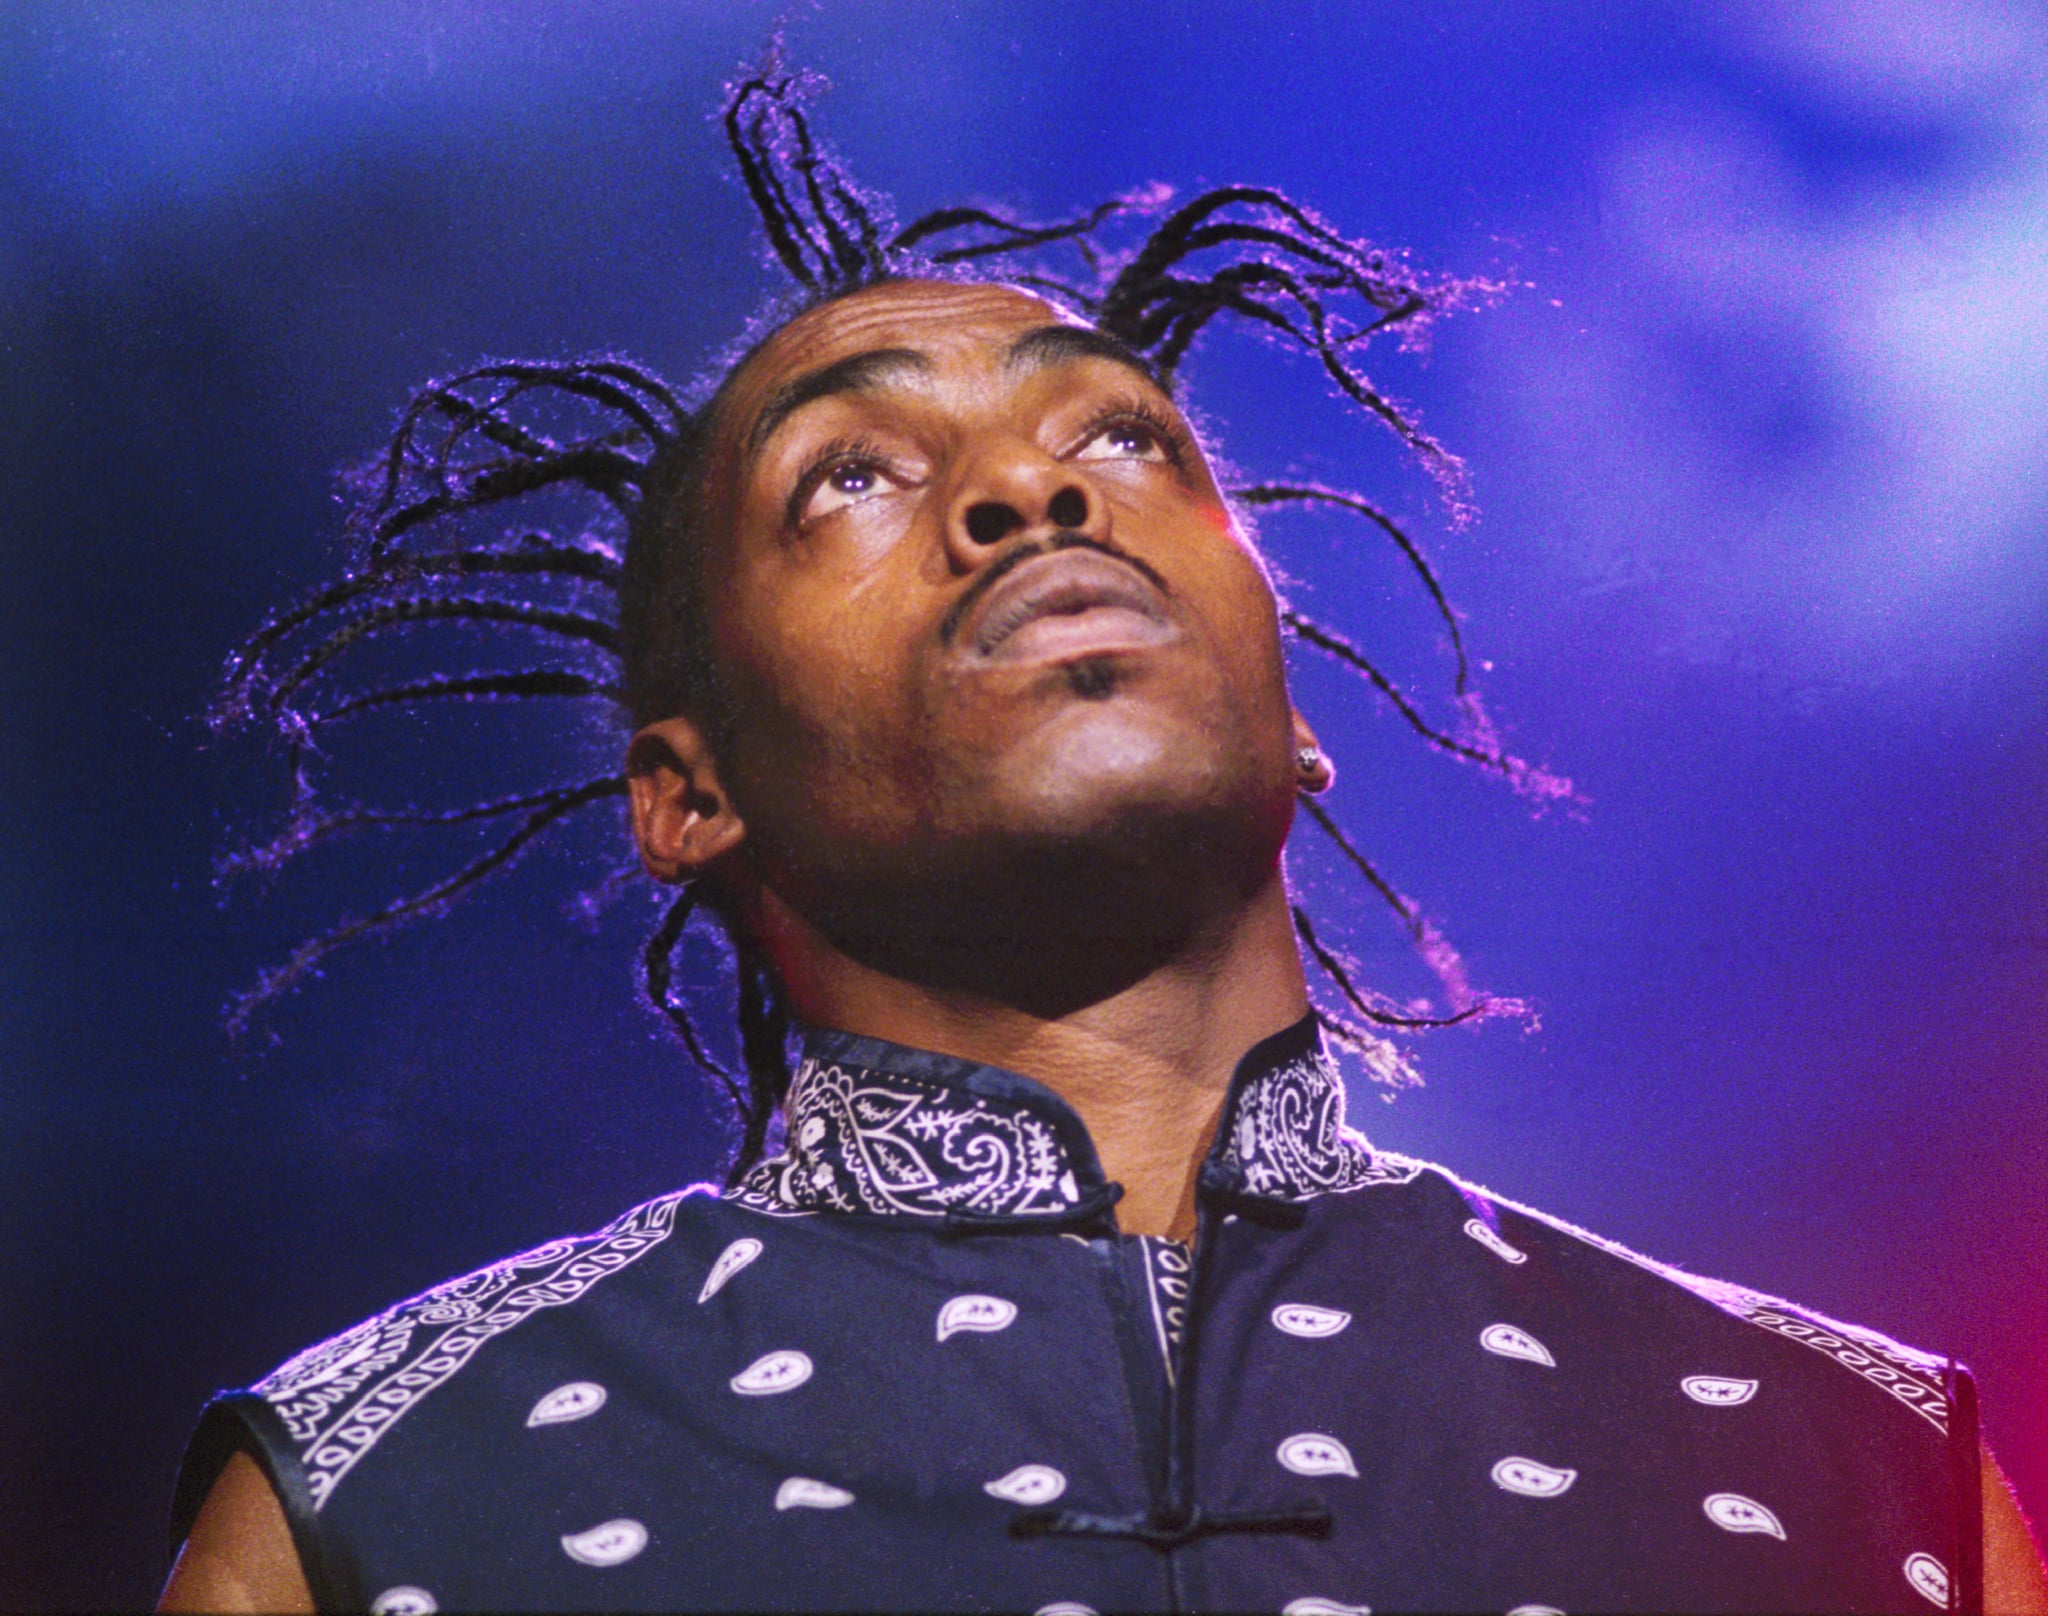 Coolio, Night of the Proms, Ahoy, Rotterdam, Netherlands, 16th November 2000. (Photo by Rob Verhorst/Redferns)